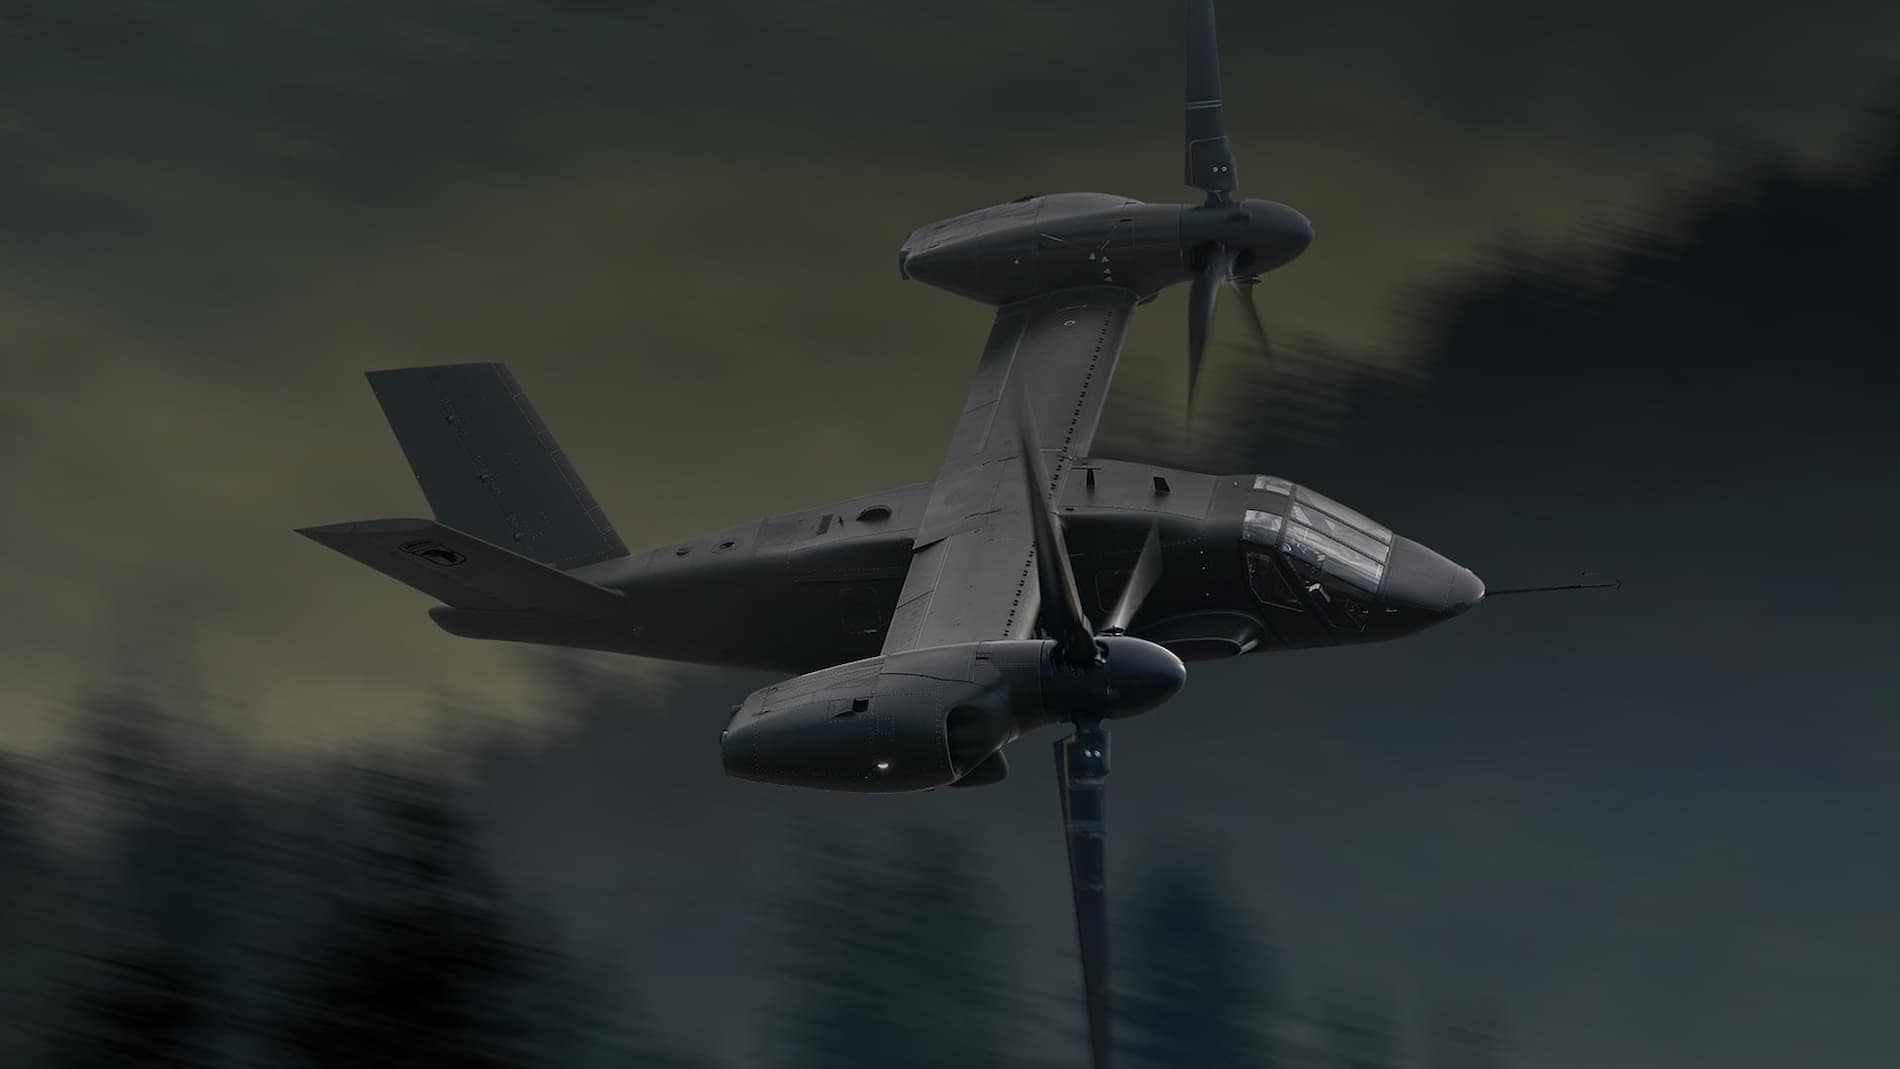 Bell V-280 Valor hovering showing a fast rope mission - Bell's entry to the U.S. Army's Future Long Range Assault Aircraft for the Future Vertical Lift (FVL) competition.